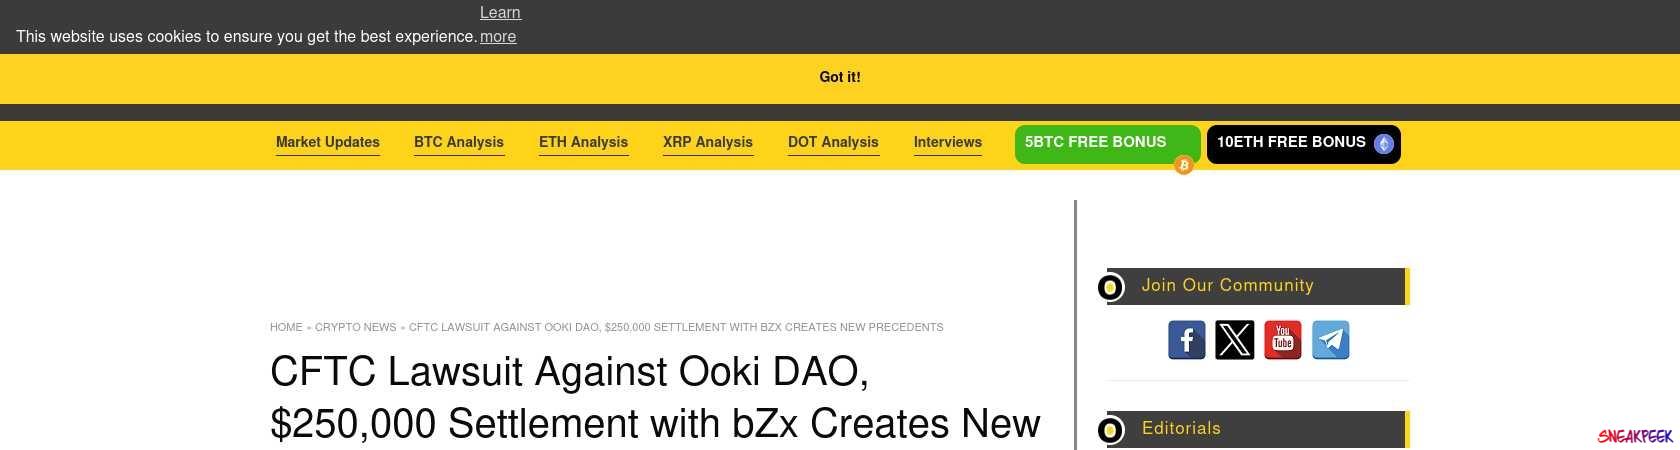 Read the full Article:  ⭲ CFTC Lawsuit Against Ooki DAO, $250,000 Settlement with bZx Creates New Precedents